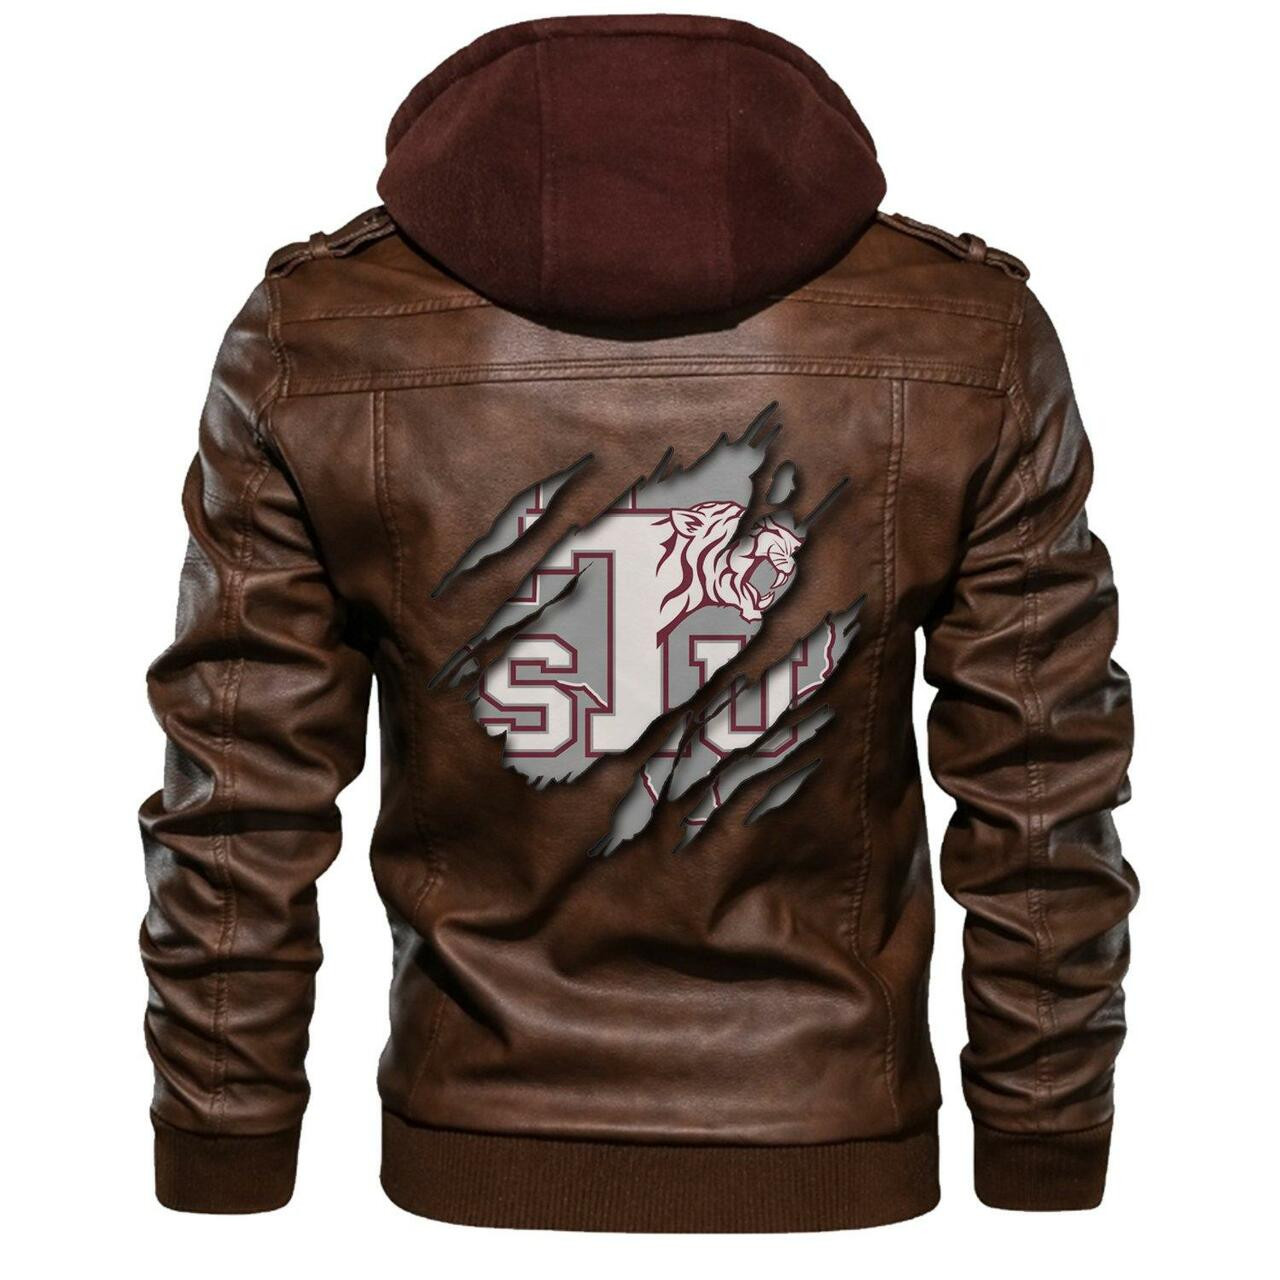 Nice leather jacket For you 157